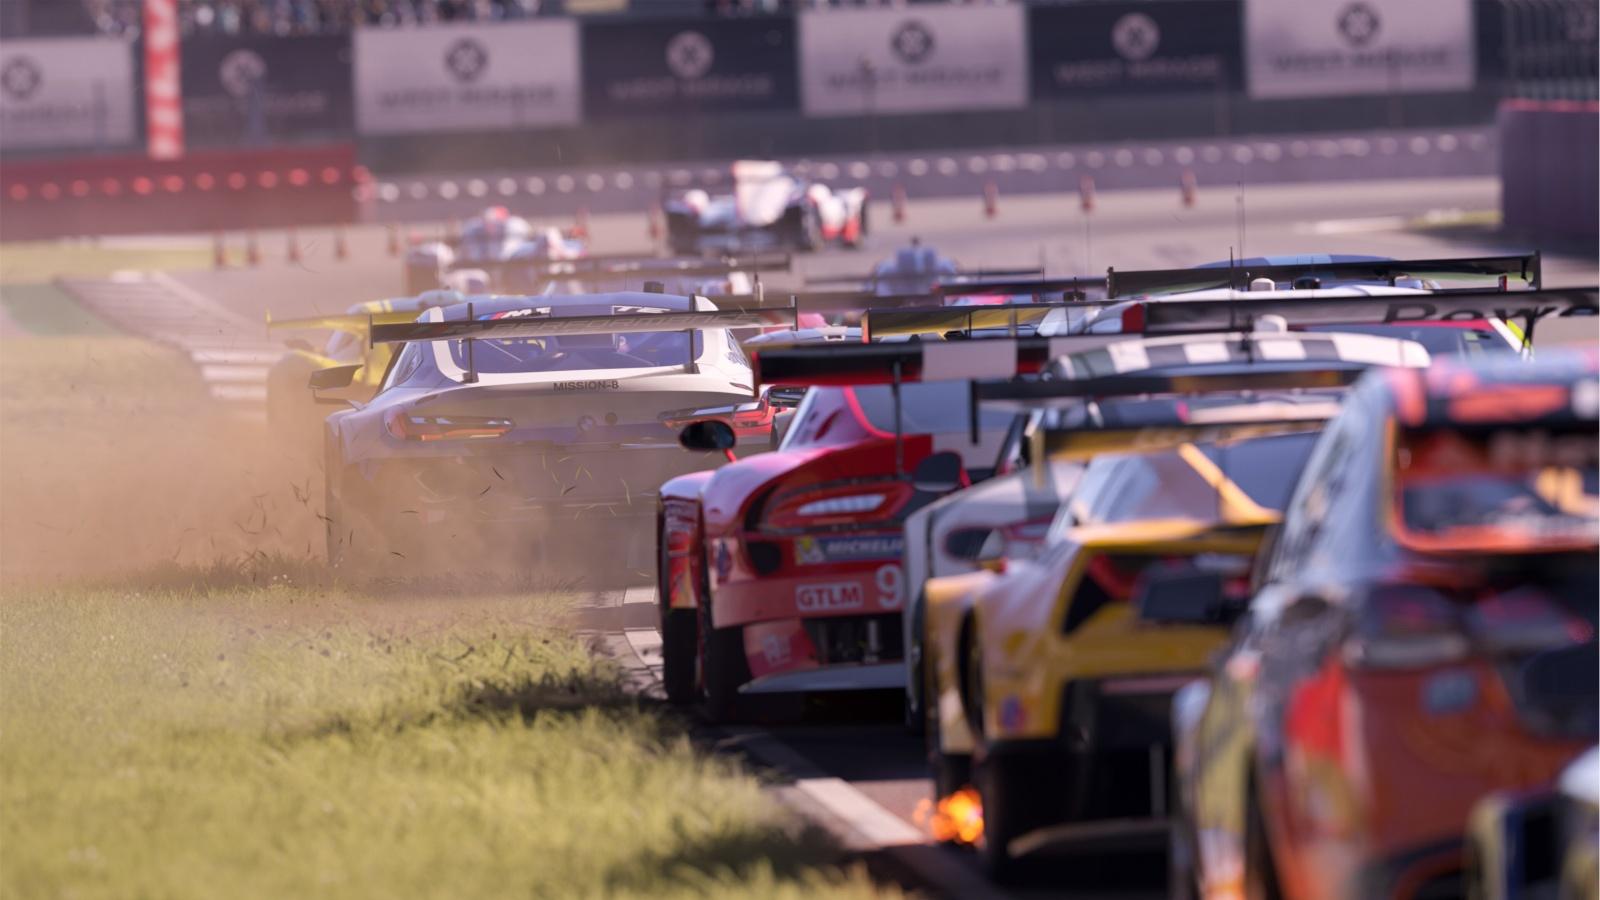 A screenshot from the game Forza Motorsport